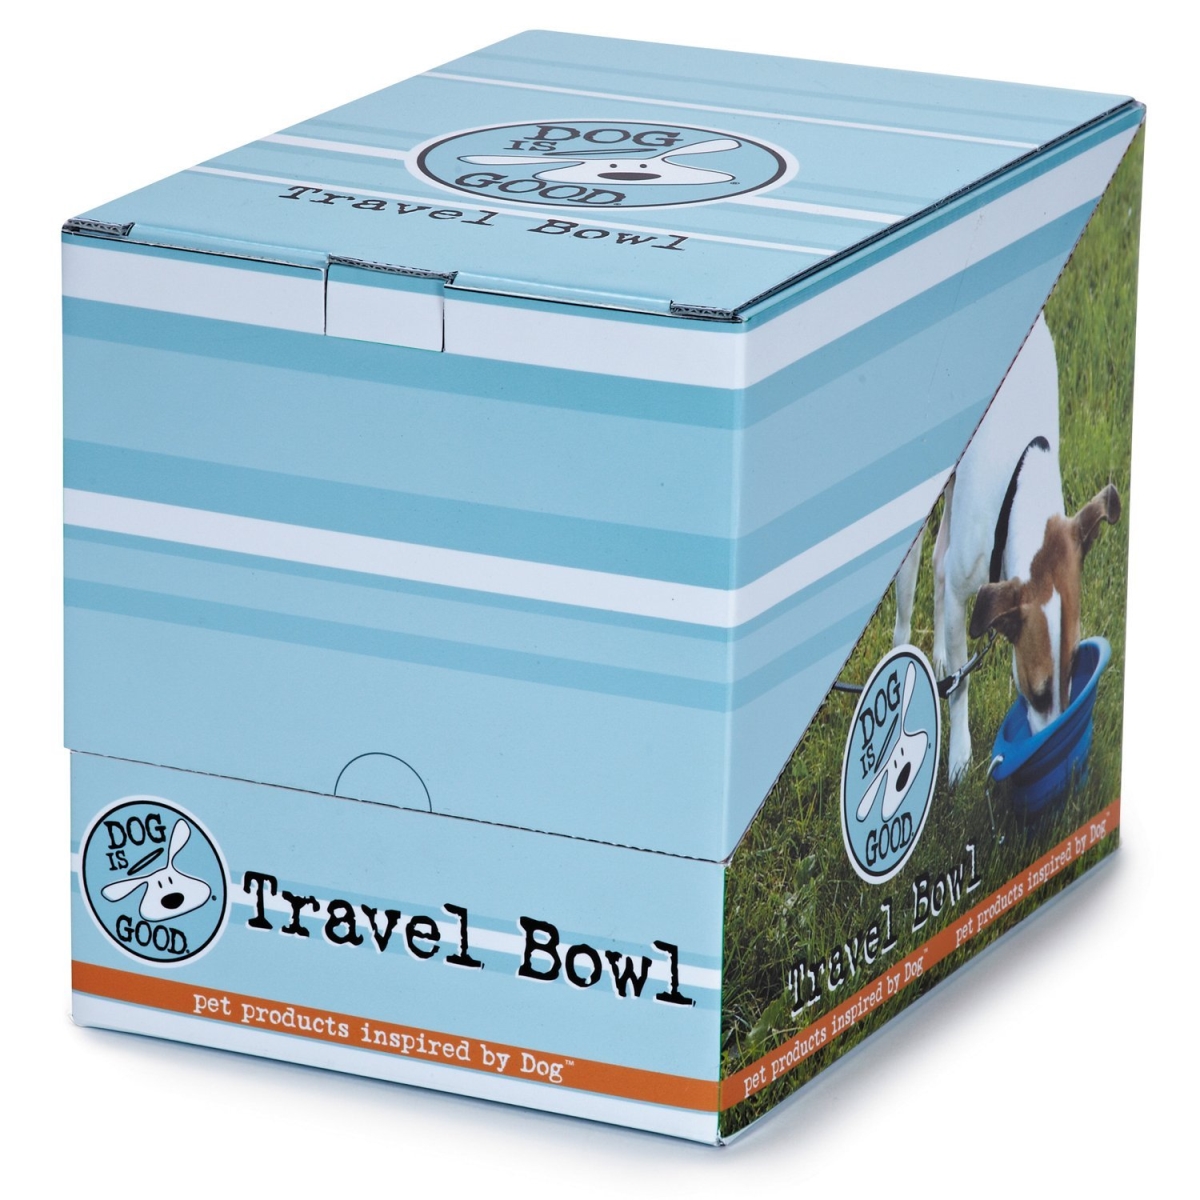 Picture of 26 oz Dog is Good Travel Bowl, Pack of 8